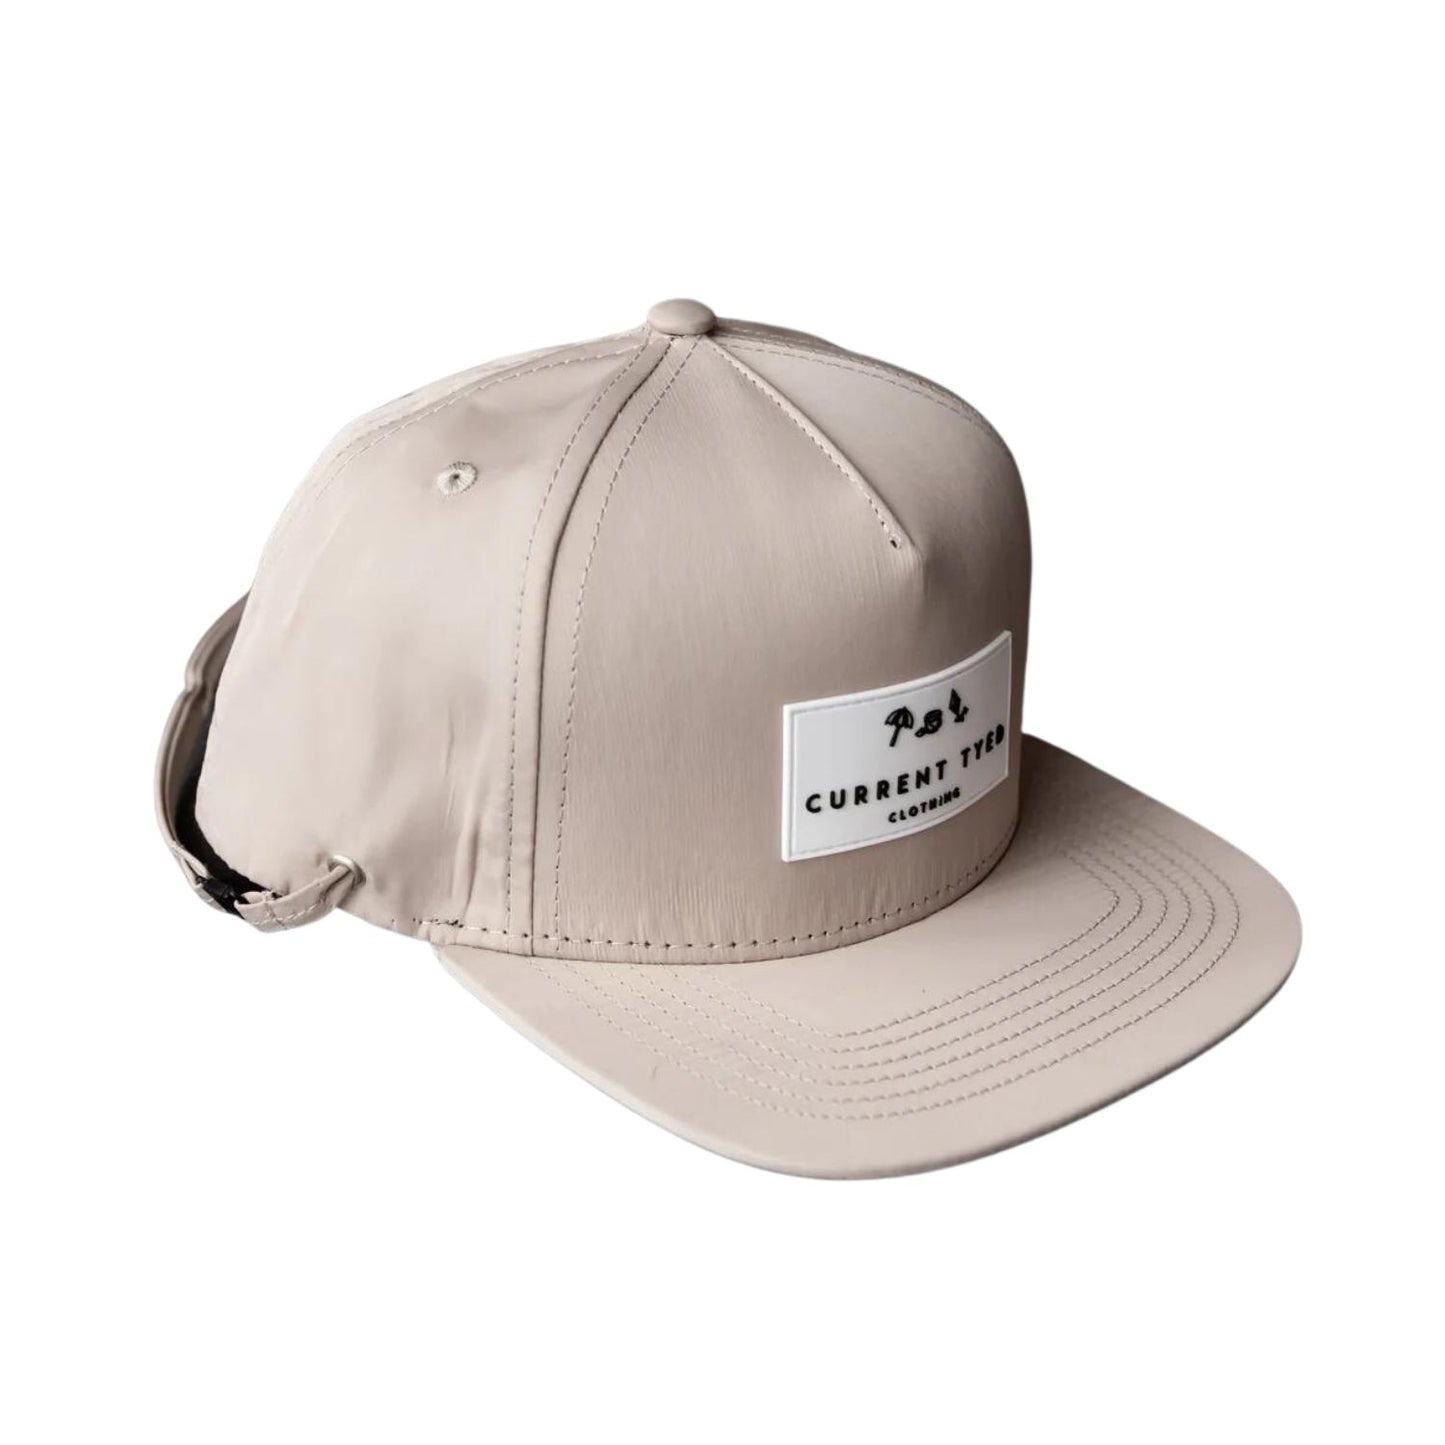 Current Tyed Clothing Made for "Shae'd" Waterproof Snapback - Beige